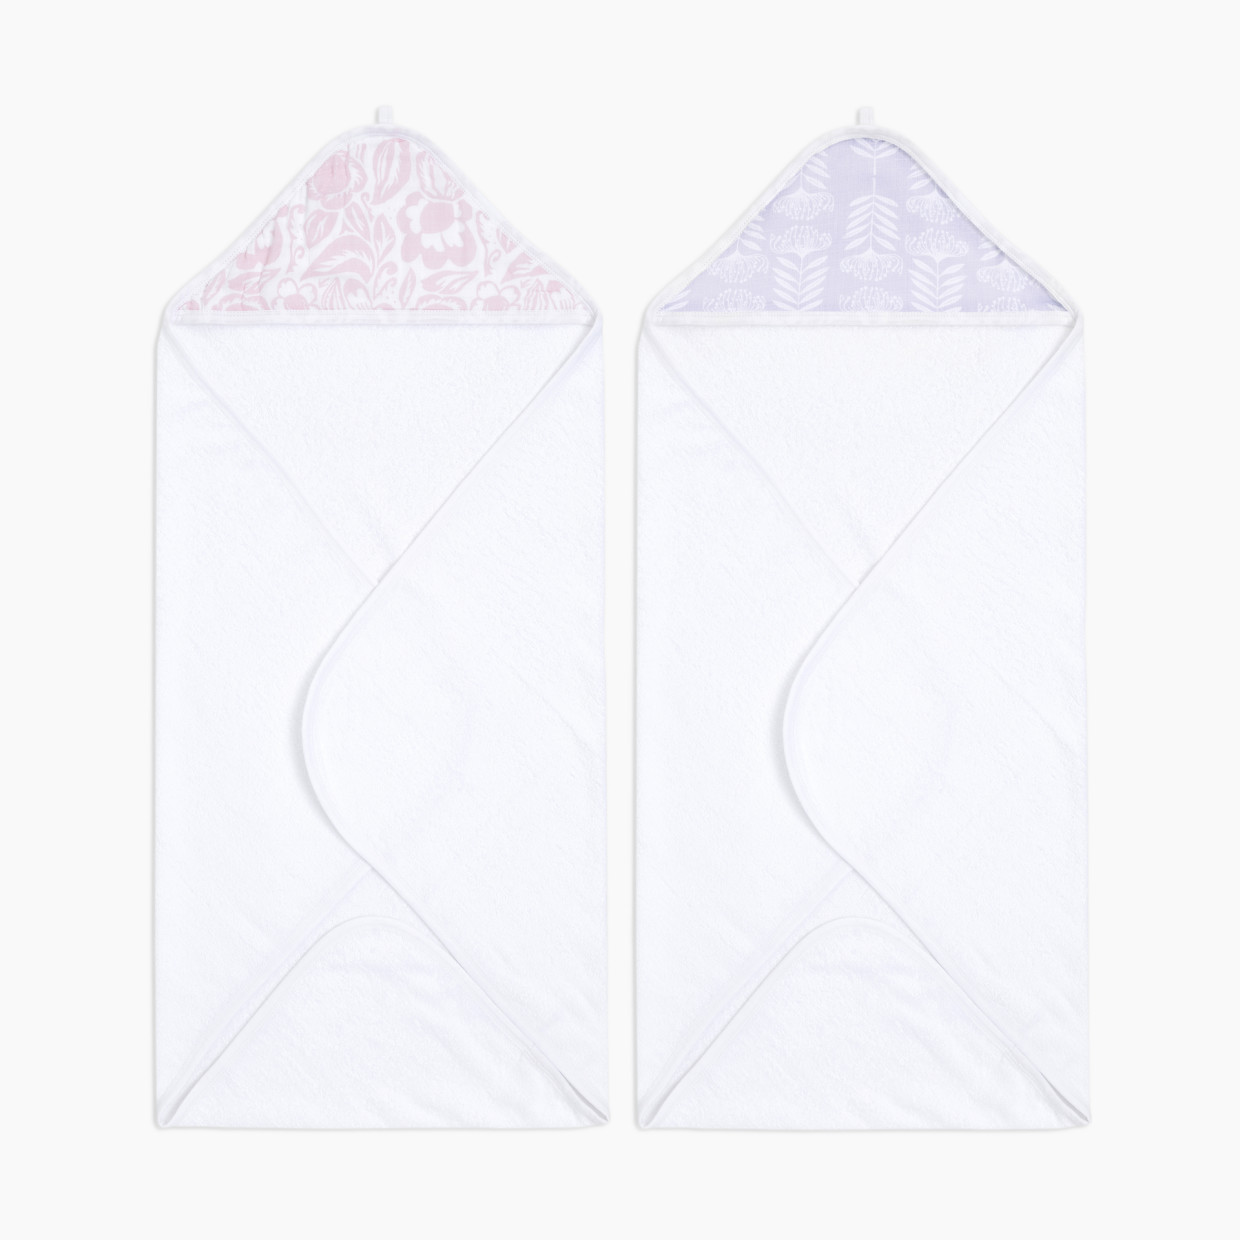 Aden + Anais Essentials Hooded Towels (2 Pack) - Damsel.